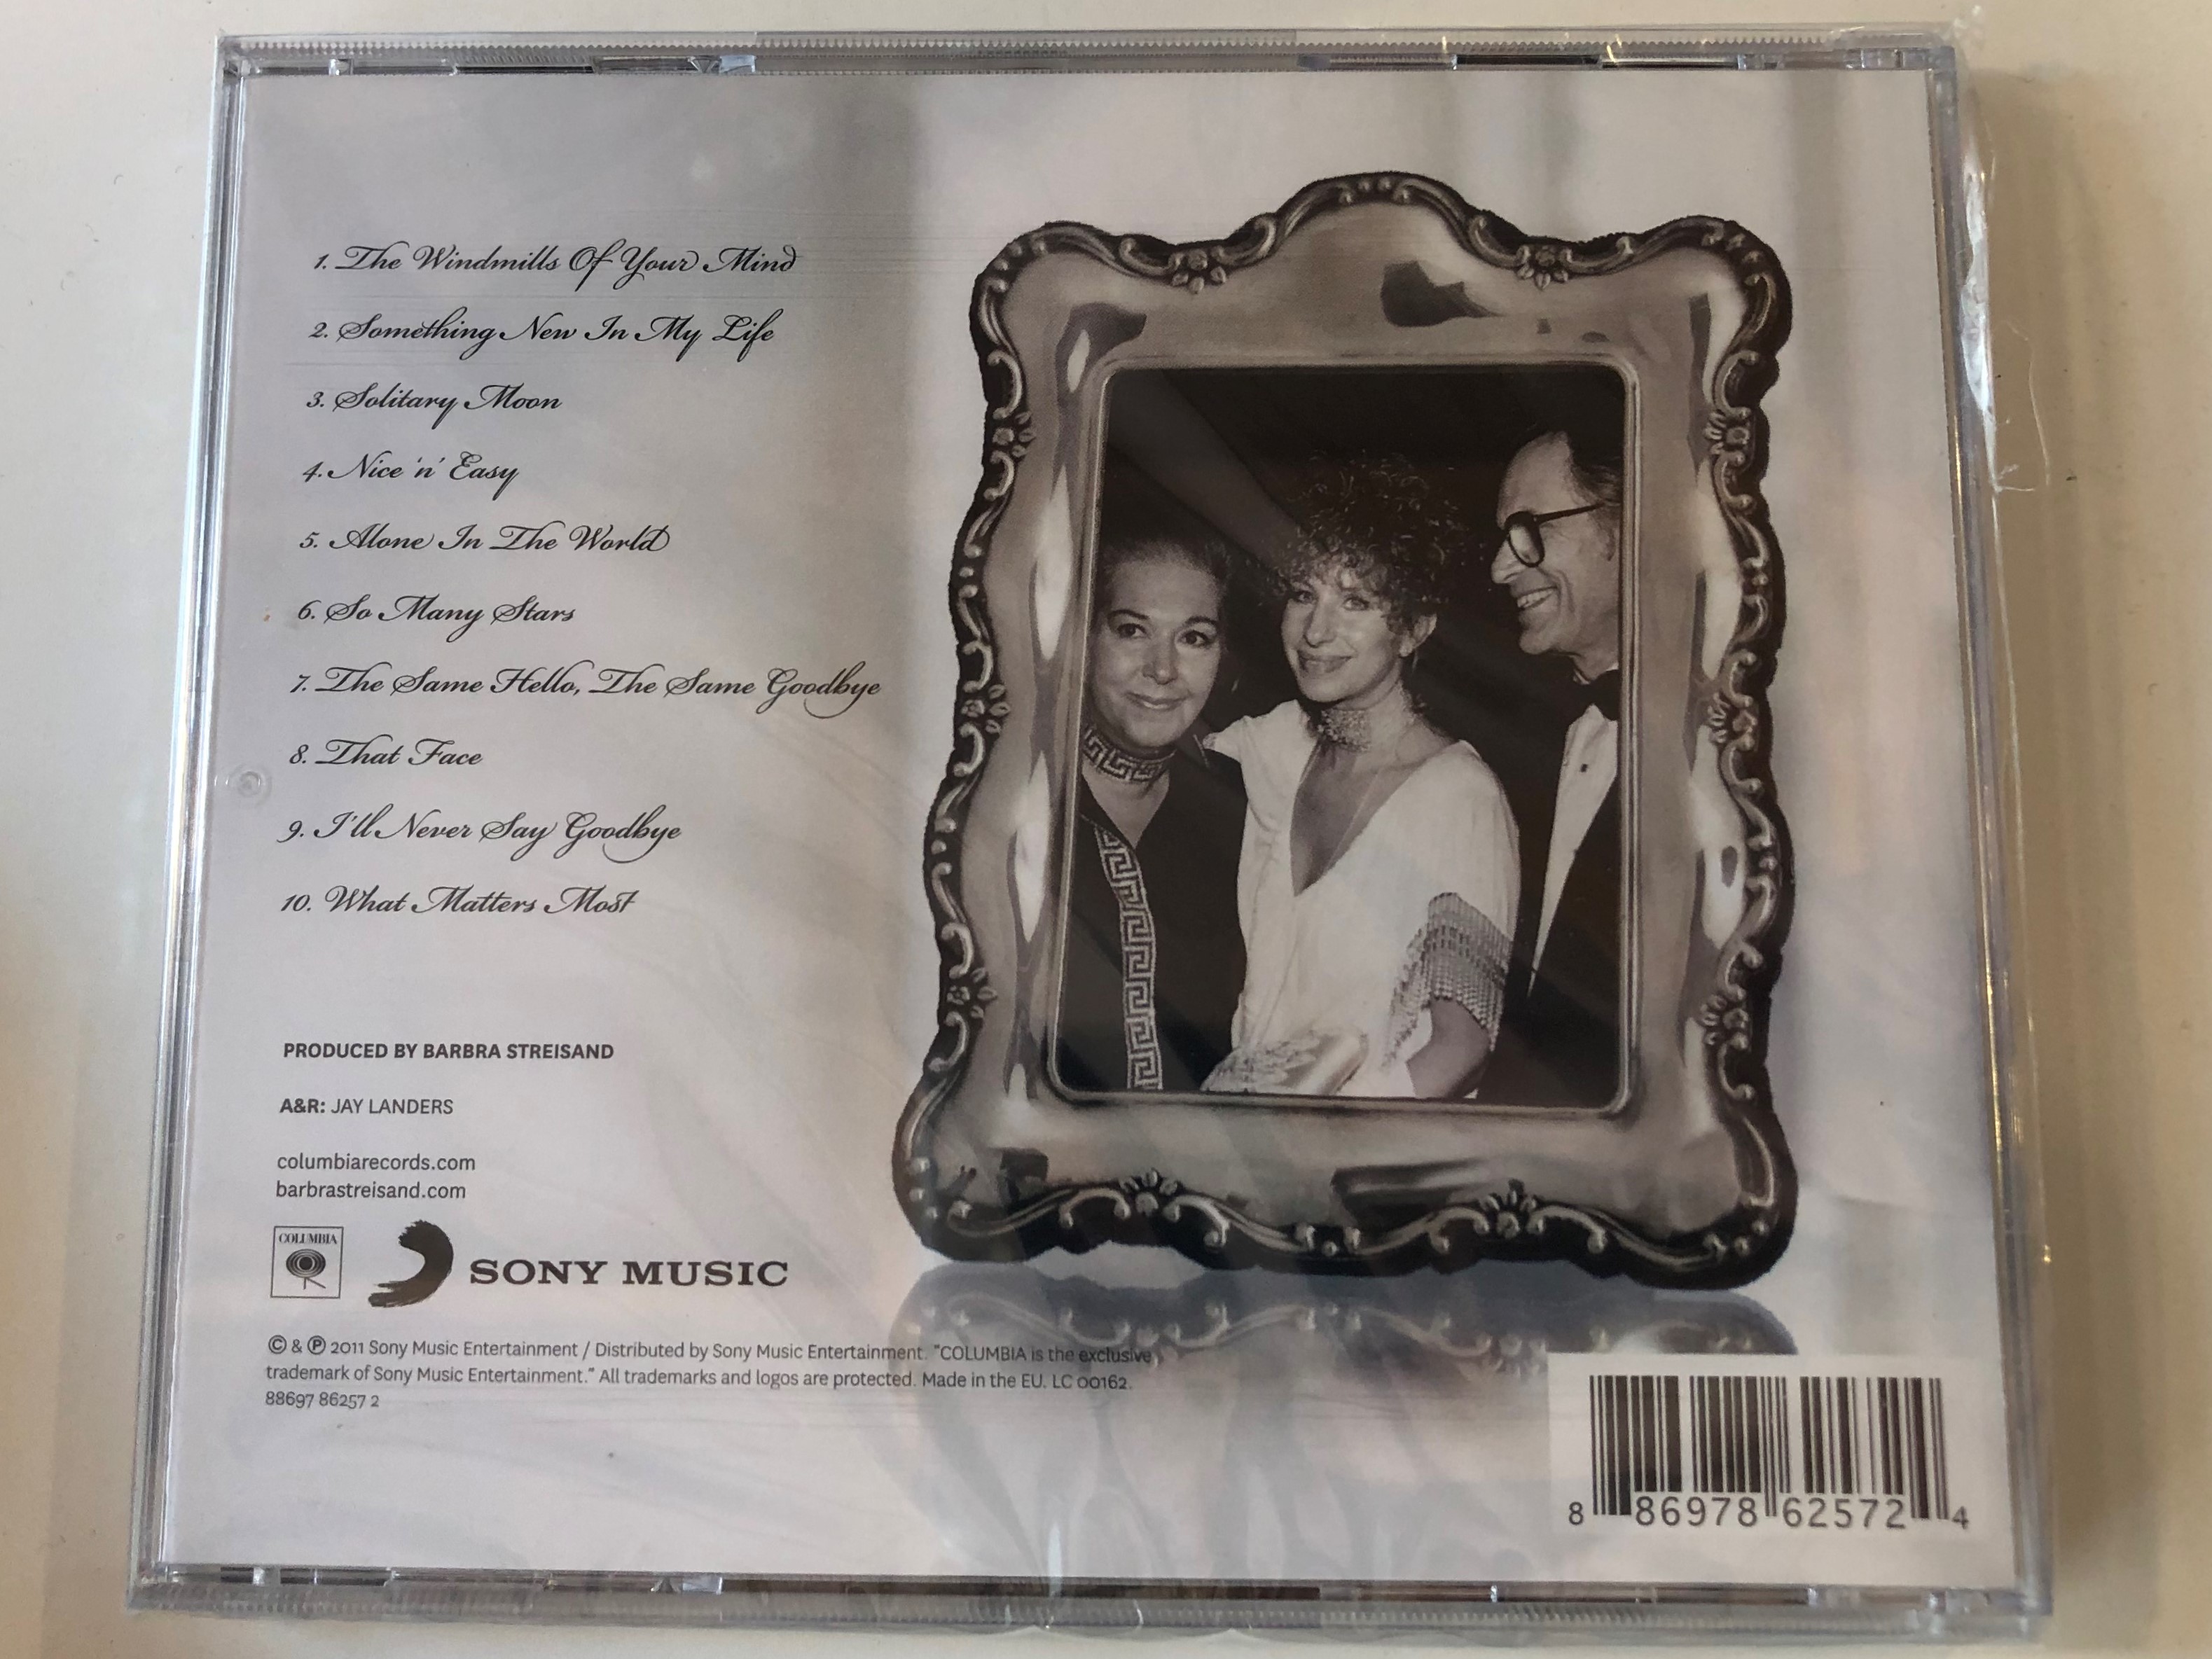 what-matters-most-barbra-streisand-sings-the-lyrics-of-alan-and-marilyn-bergman-the-all-new-studio-album-from-barbra-streisand-that-face-nice-n-easy-solitary-moon-and-7-more-sony-music-.jpg